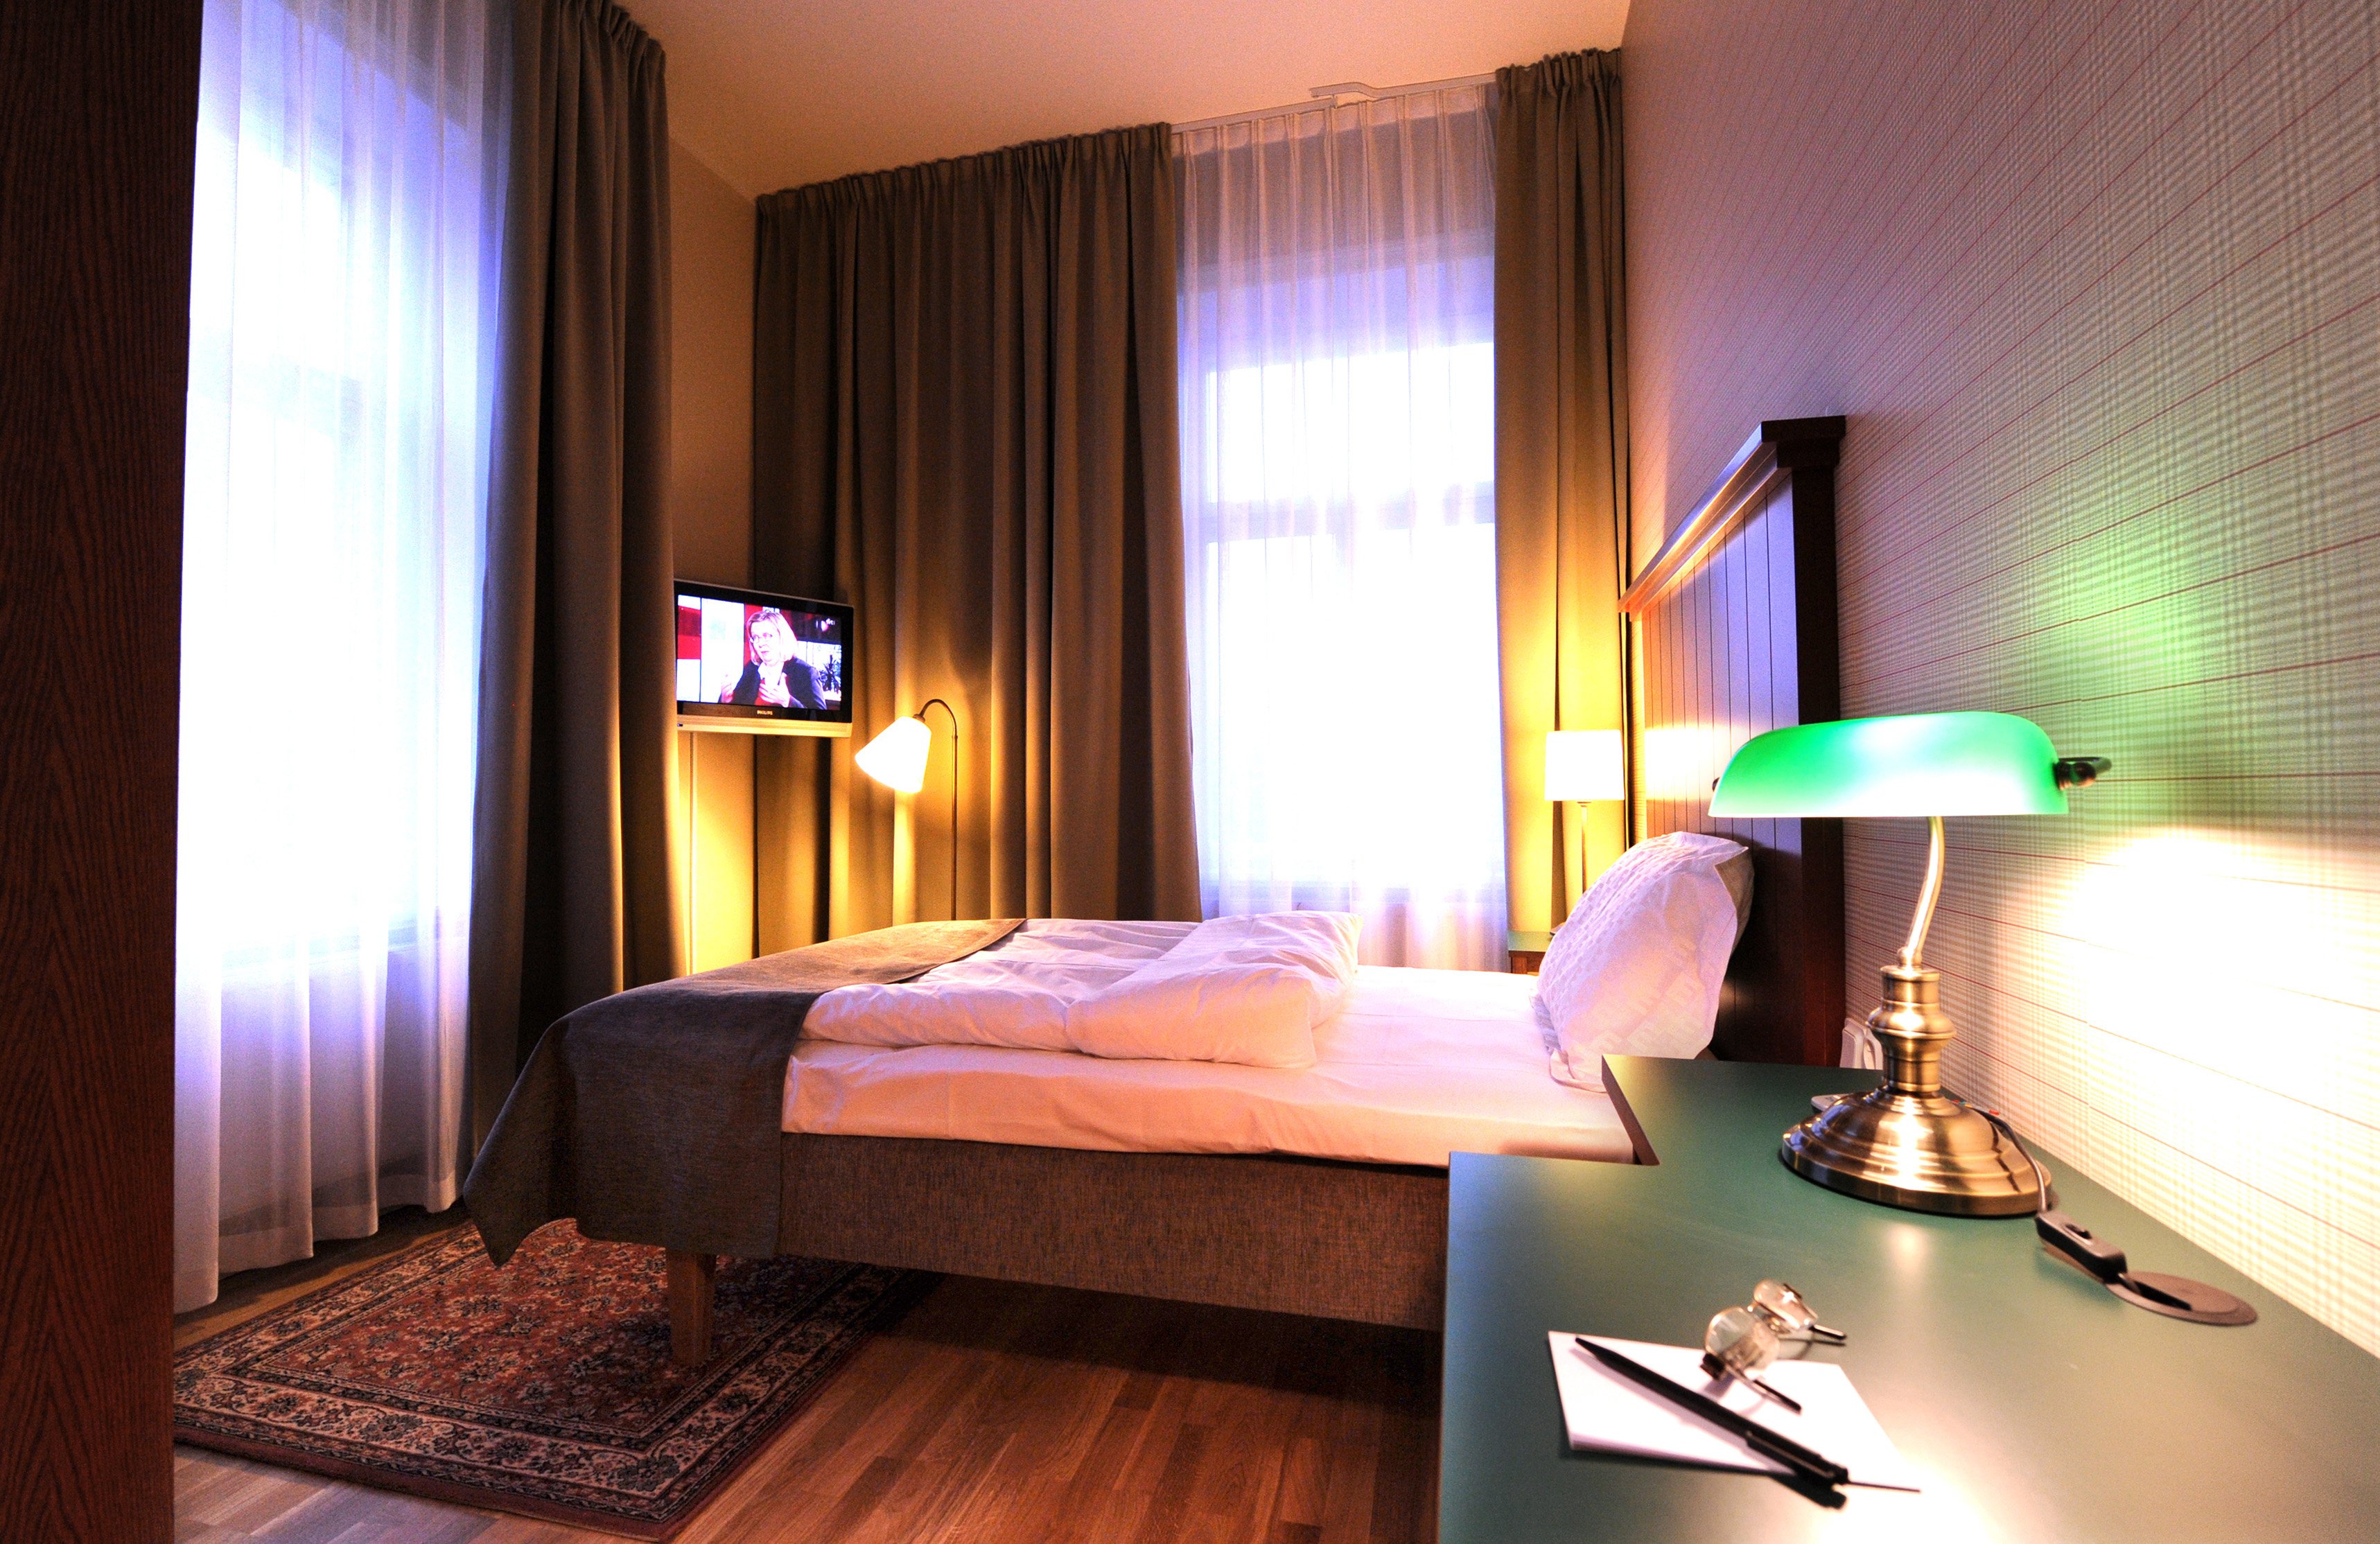 Hotel room with bed, large headboard and TV